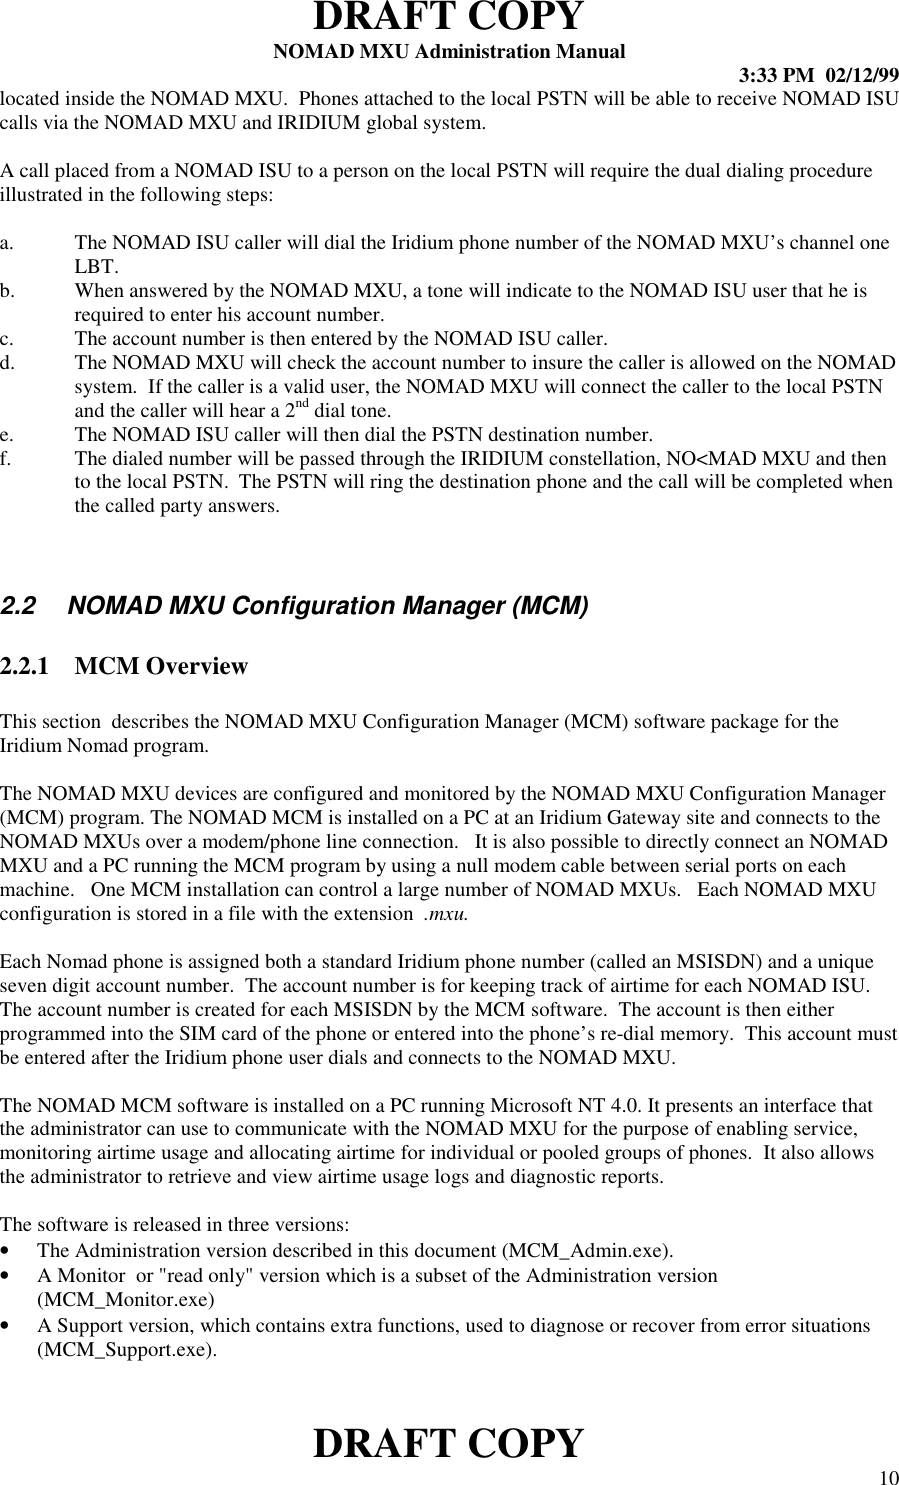 DRAFT COPYNOMAD MXU Administration Manual 3:33 PM  02/12/99DRAFT COPY 10located inside the NOMAD MXU.  Phones attached to the local PSTN will be able to receive NOMAD ISUcalls via the NOMAD MXU and IRIDIUM global system.A call placed from a NOMAD ISU to a person on the local PSTN will require the dual dialing procedureillustrated in the following steps:a. The NOMAD ISU caller will dial the Iridium phone number of the NOMAD MXU’s channel oneLBT.b. When answered by the NOMAD MXU, a tone will indicate to the NOMAD ISU user that he isrequired to enter his account number.c. The account number is then entered by the NOMAD ISU caller.d. The NOMAD MXU will check the account number to insure the caller is allowed on the NOMADsystem.  If the caller is a valid user, the NOMAD MXU will connect the caller to the local PSTNand the caller will hear a 2nd dial tone.e. The NOMAD ISU caller will then dial the PSTN destination number.f. The dialed number will be passed through the IRIDIUM constellation, NO&lt;MAD MXU and thento the local PSTN.  The PSTN will ring the destination phone and the call will be completed whenthe called party answers.2.2   NOMAD MXU Configuration Manager (MCM)2.2.1 MCM OverviewThis section  describes the NOMAD MXU Configuration Manager (MCM) software package for theIridium Nomad program.The NOMAD MXU devices are configured and monitored by the NOMAD MXU Configuration Manager(MCM) program. The NOMAD MCM is installed on a PC at an Iridium Gateway site and connects to theNOMAD MXUs over a modem/phone line connection.   It is also possible to directly connect an NOMADMXU and a PC running the MCM program by using a null modem cable between serial ports on eachmachine.   One MCM installation can control a large number of NOMAD MXUs.   Each NOMAD MXUconfiguration is stored in a file with the extension  .mxu.Each Nomad phone is assigned both a standard Iridium phone number (called an MSISDN) and a uniqueseven digit account number.  The account number is for keeping track of airtime for each NOMAD ISU.The account number is created for each MSISDN by the MCM software.  The account is then eitherprogrammed into the SIM card of the phone or entered into the phone’s re-dial memory.  This account mustbe entered after the Iridium phone user dials and connects to the NOMAD MXU.The NOMAD MCM software is installed on a PC running Microsoft NT 4.0. It presents an interface thatthe administrator can use to communicate with the NOMAD MXU for the purpose of enabling service,monitoring airtime usage and allocating airtime for individual or pooled groups of phones.  It also allowsthe administrator to retrieve and view airtime usage logs and diagnostic reports.The software is released in three versions:• The Administration version described in this document (MCM_Admin.exe).• A Monitor  or &quot;read only&quot; version which is a subset of the Administration version(MCM_Monitor.exe)• A Support version, which contains extra functions, used to diagnose or recover from error situations(MCM_Support.exe).